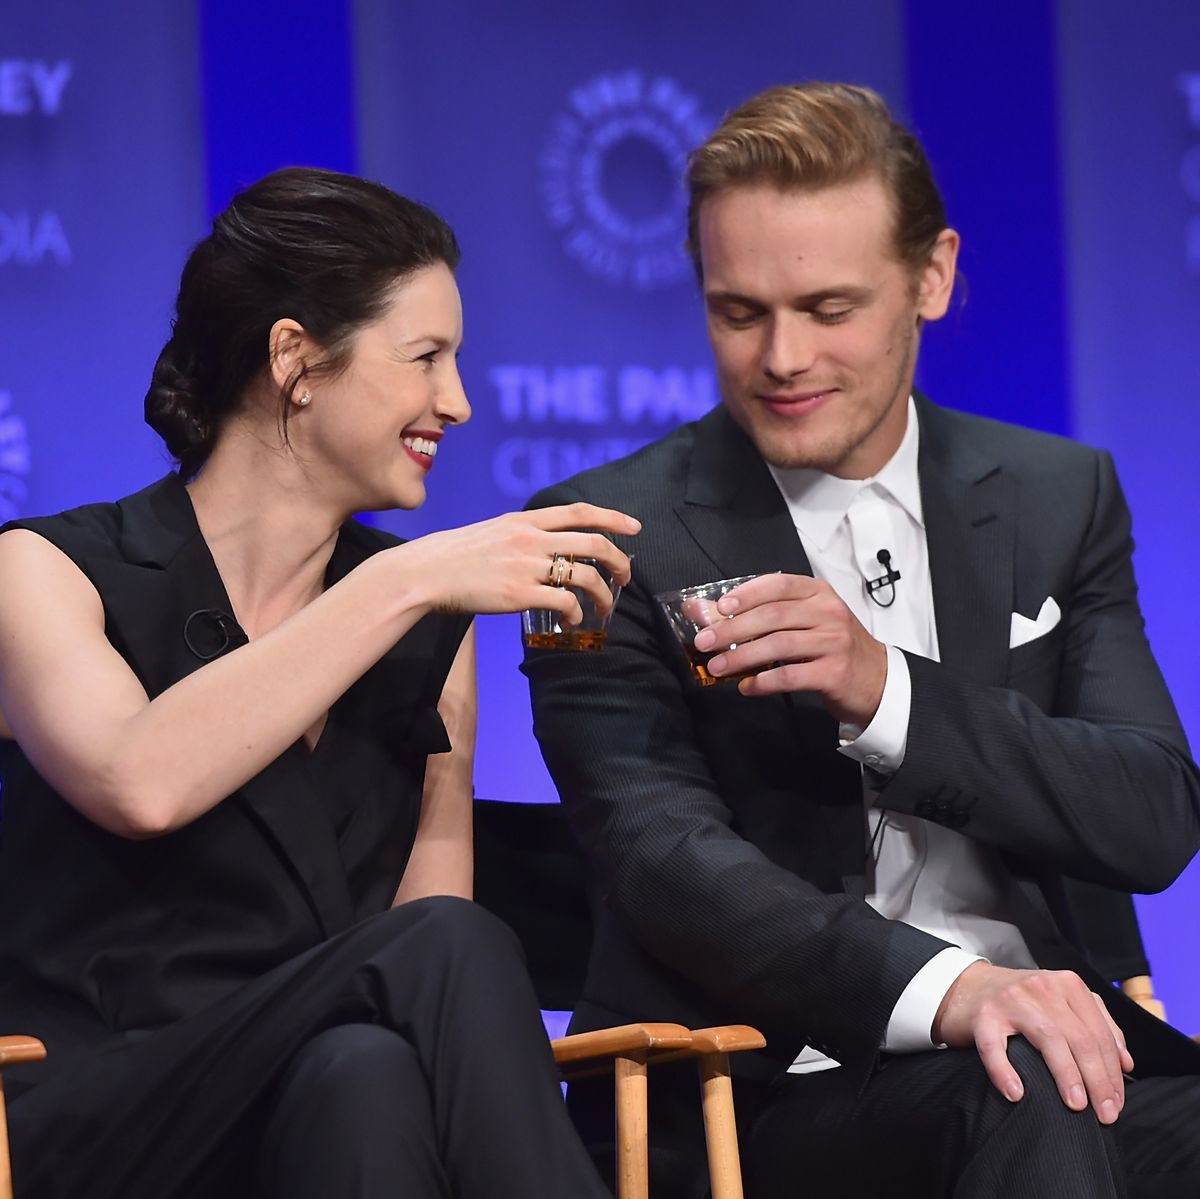 EXCLUSIVE: Your Favorite TV Stars Pose for Photos at PaleyFest